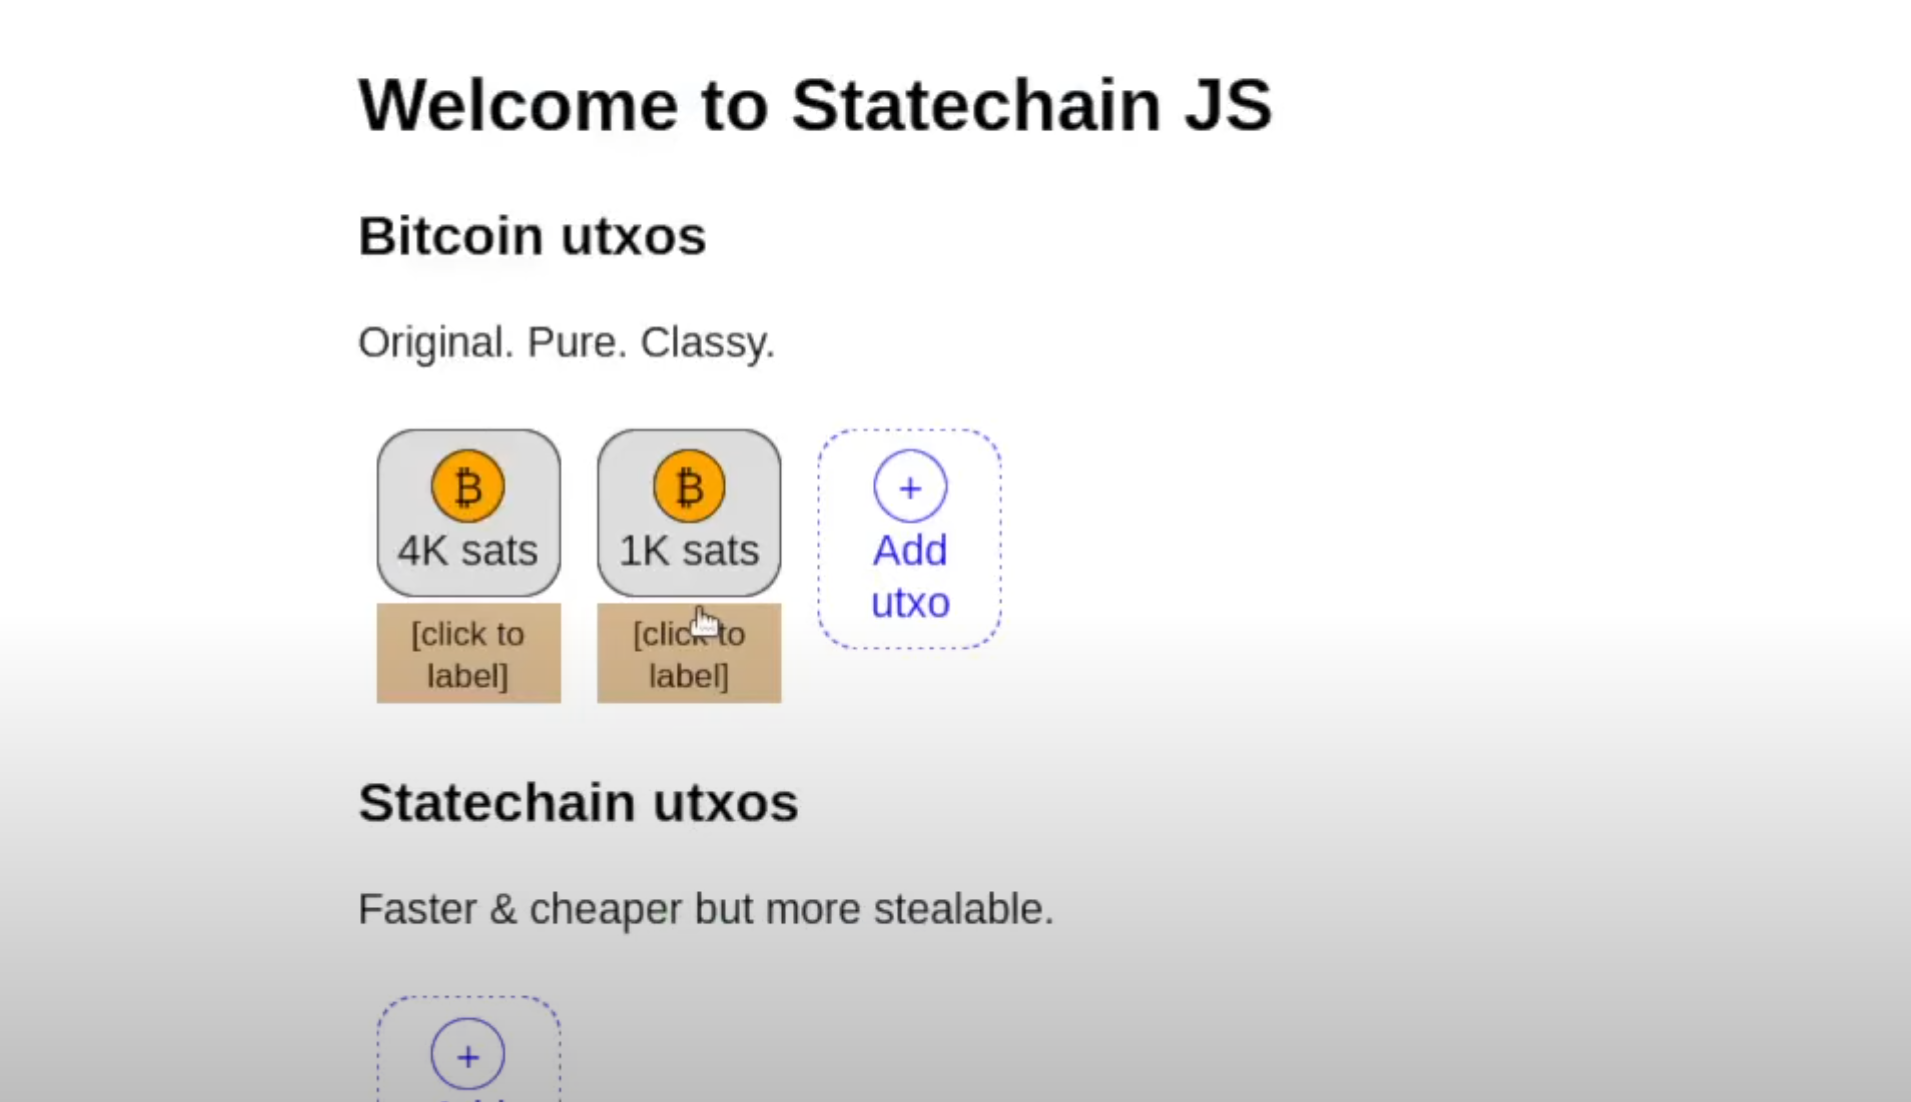 StatechainJS: Like Ecash but If Operator Goes Down You Can Recover Your Sats